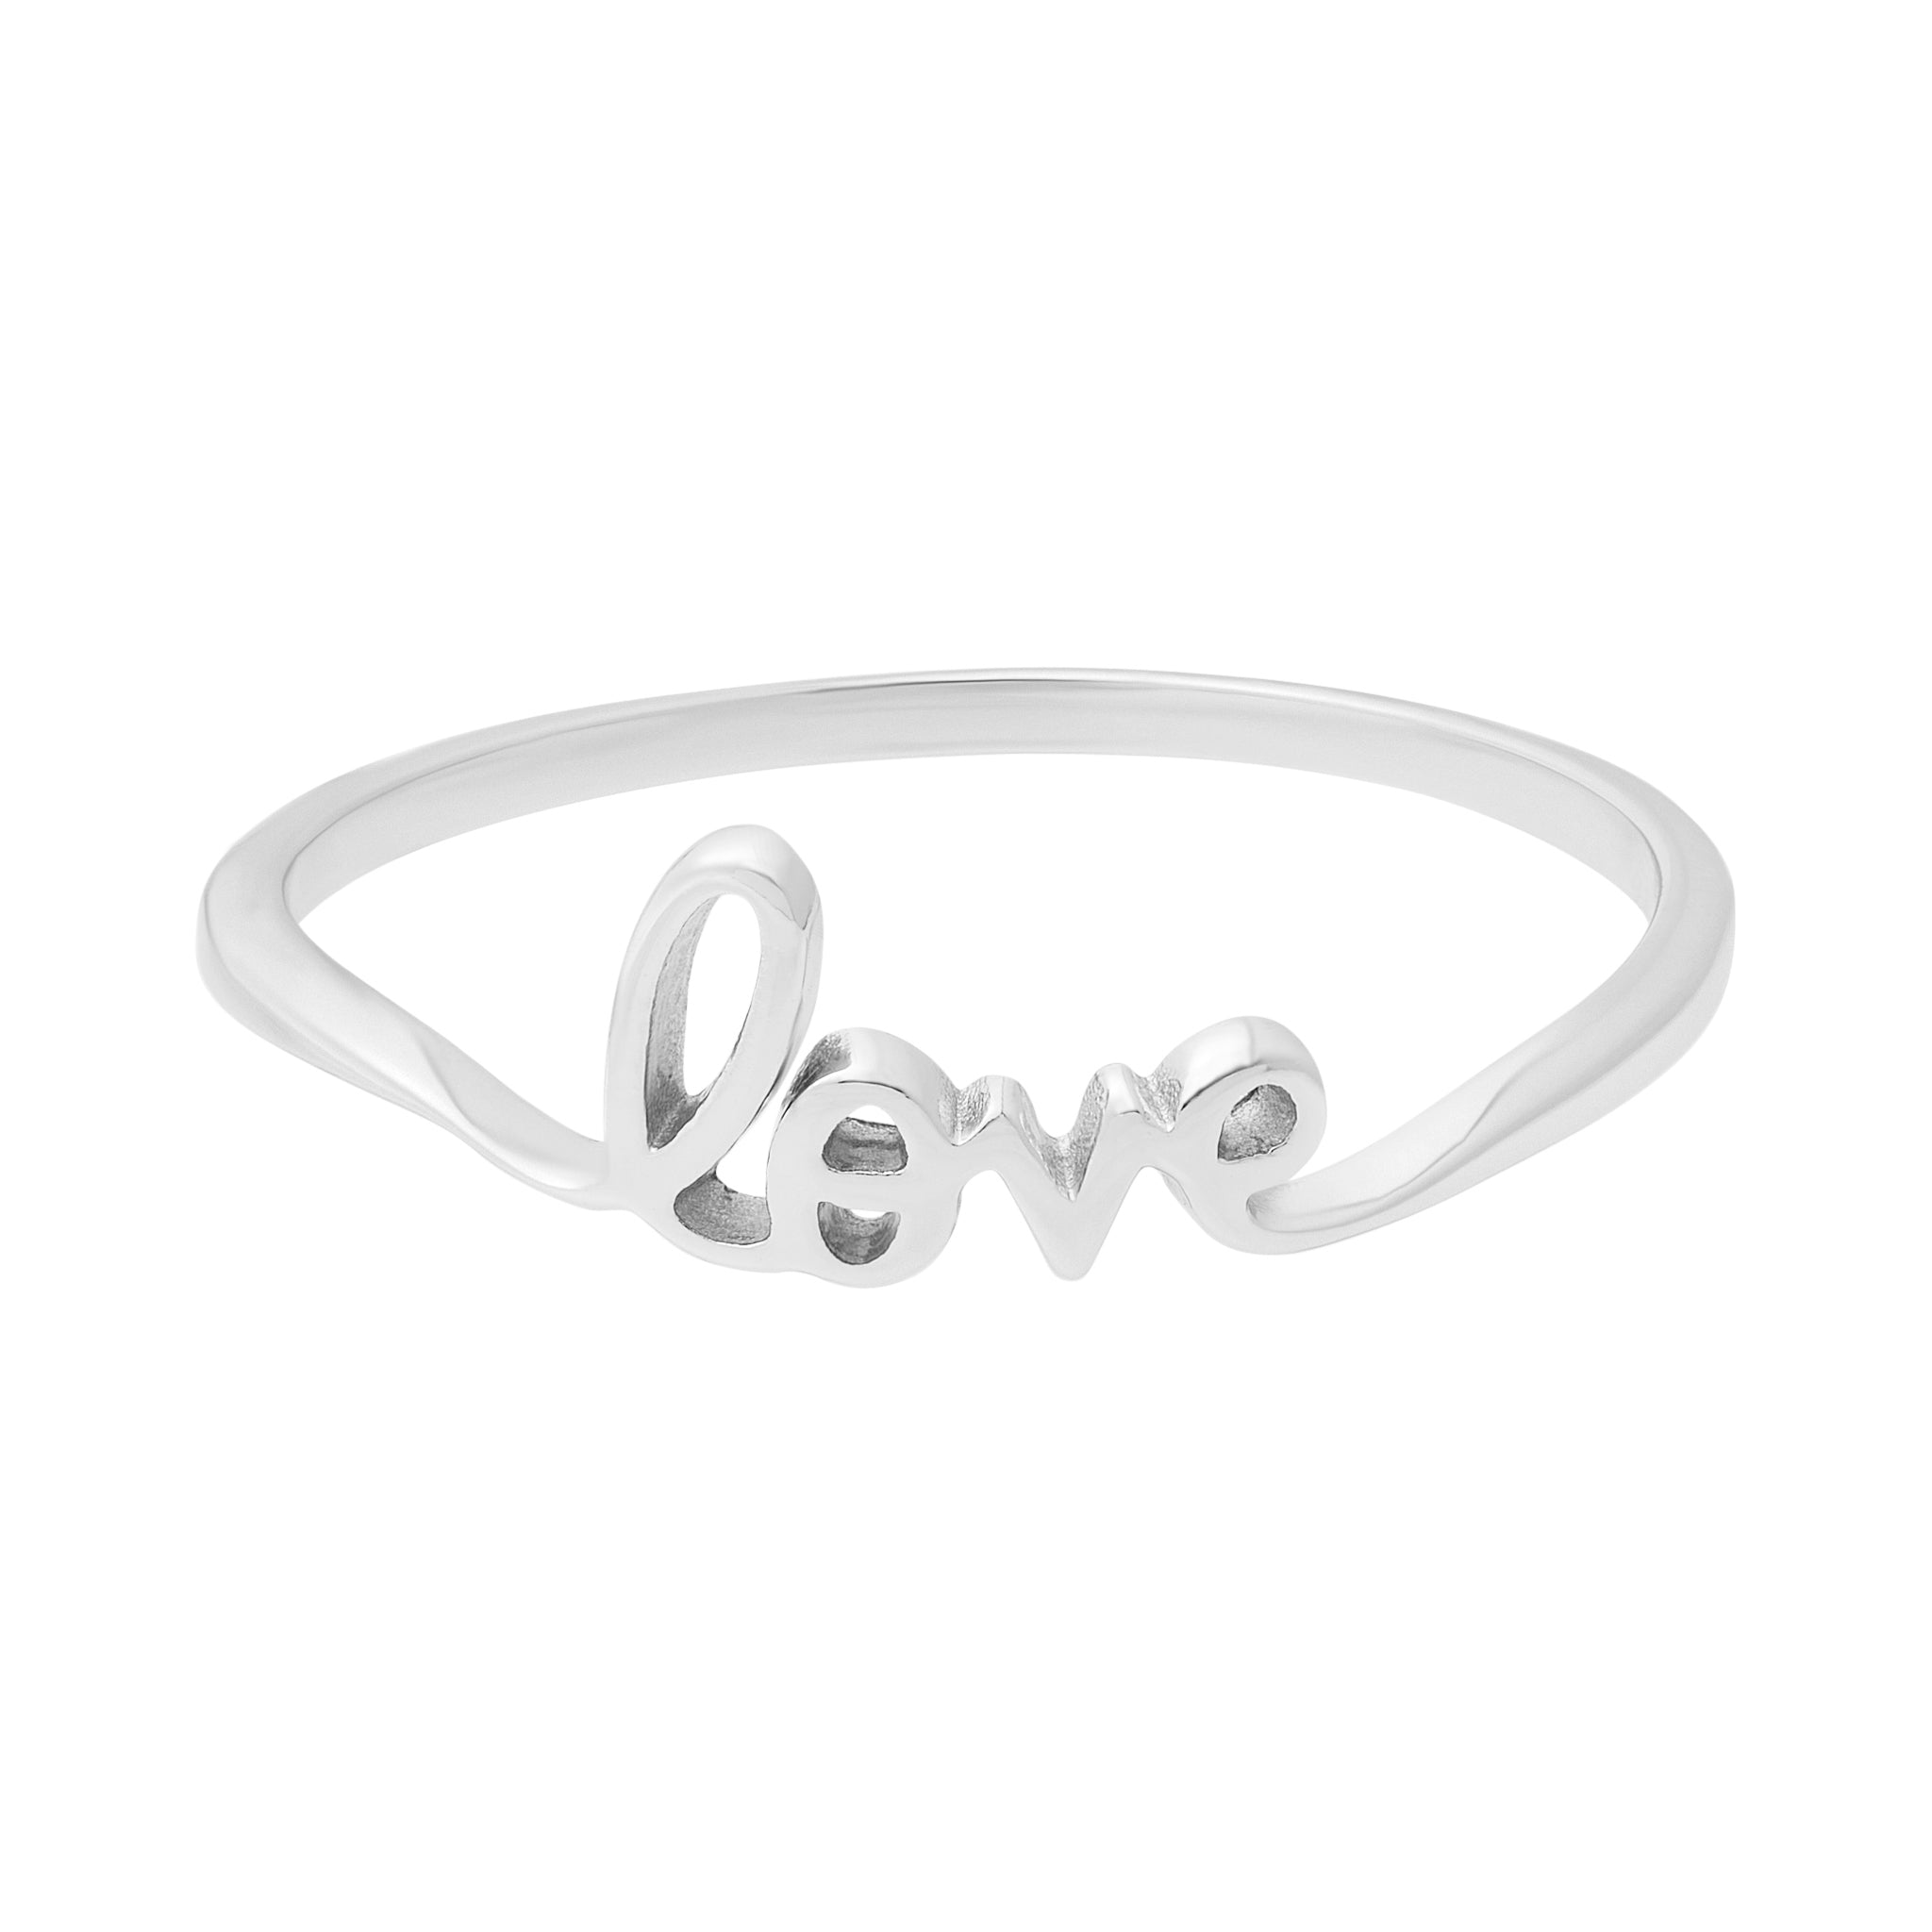 Love Ring - Silver